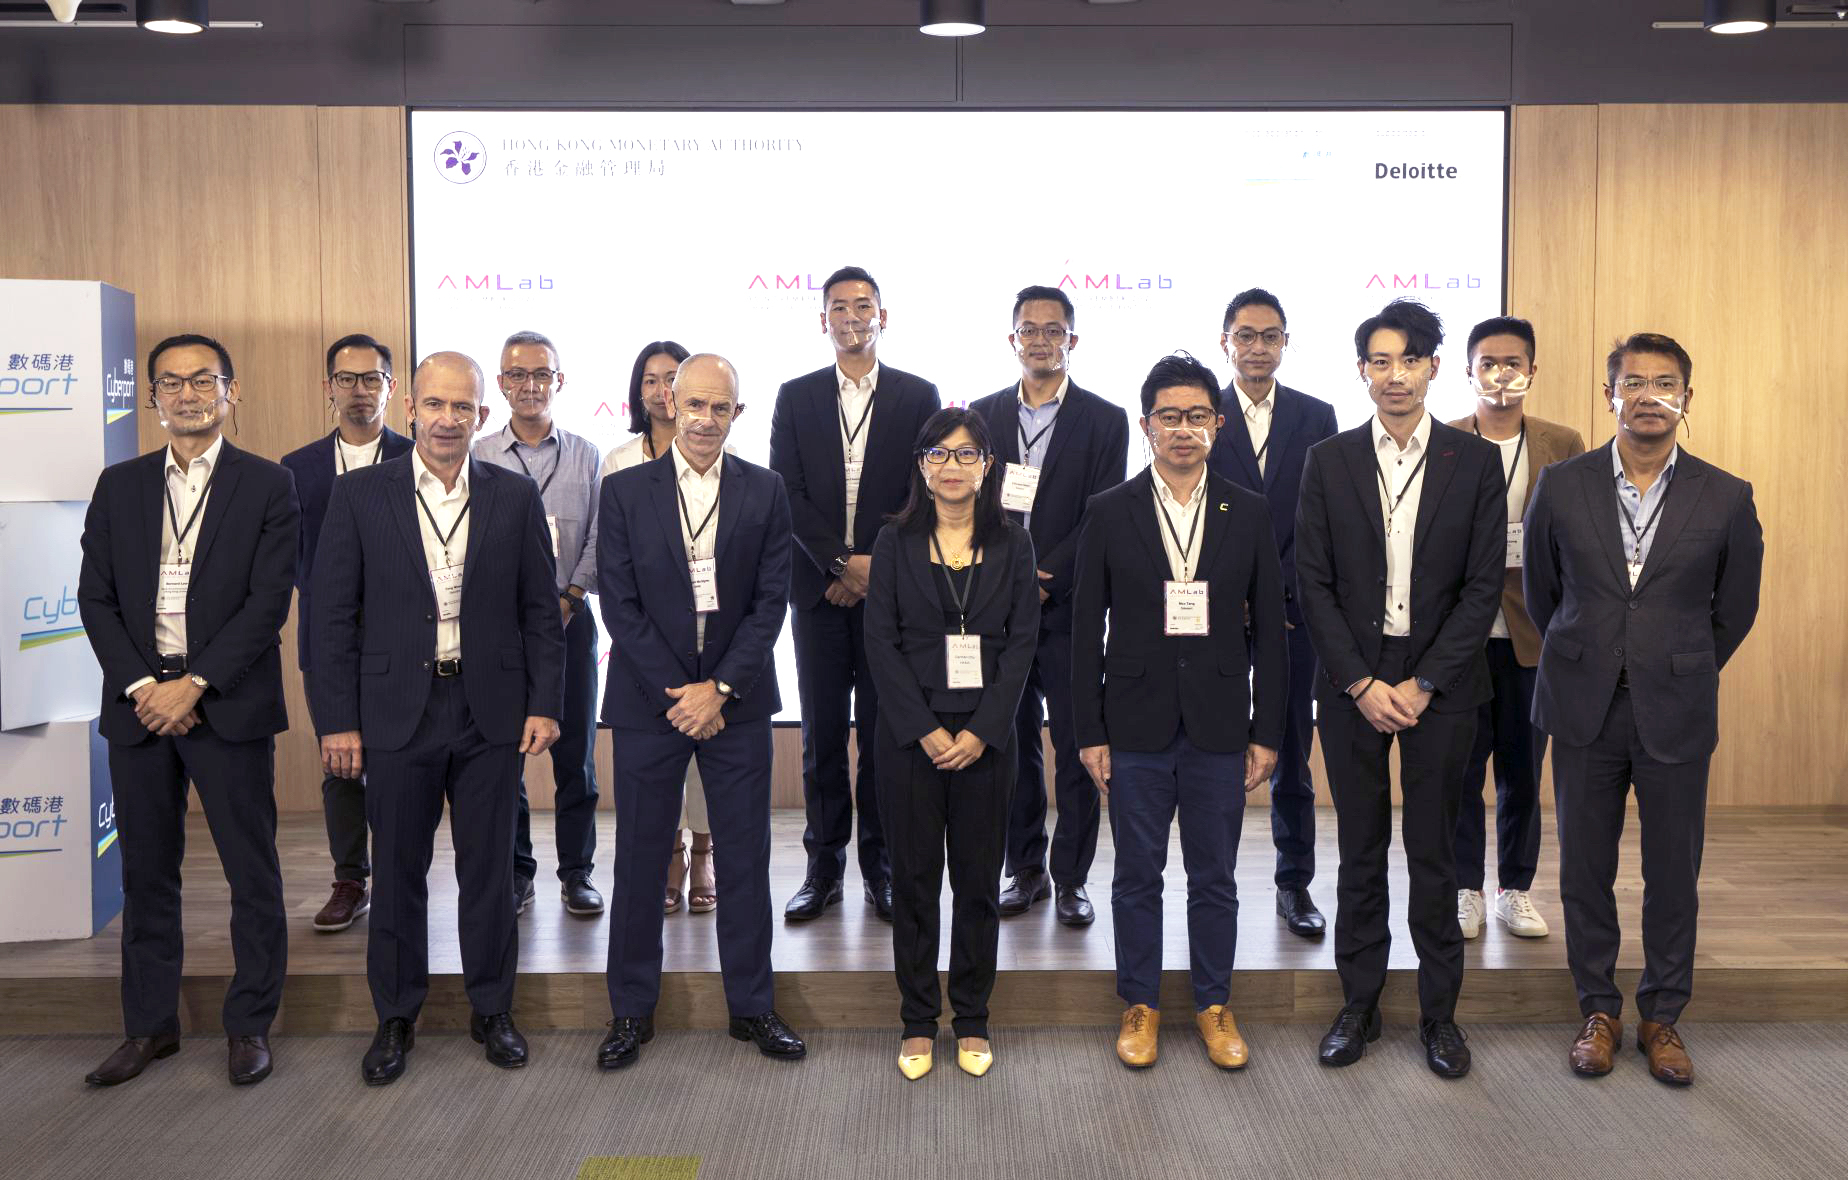 Ms Carmen Chu, Executive Director (Enforcement and AML), Hong Kong Monetary Authority (HKMA) (front row, fourth from left), Mr Rico Tang, Senior Manager, Fintech (Blockchain and Regtech), Cyberport (front row, third from right), Mr Stewart McGlynn, Head (AML and Financial Crime Risk), HKMA (front row, third from left) and representatives from InvestHK, Hong Kong Police Force, participating banks and technology firms, and Deloitte participate in the first AMLab today (5 November).